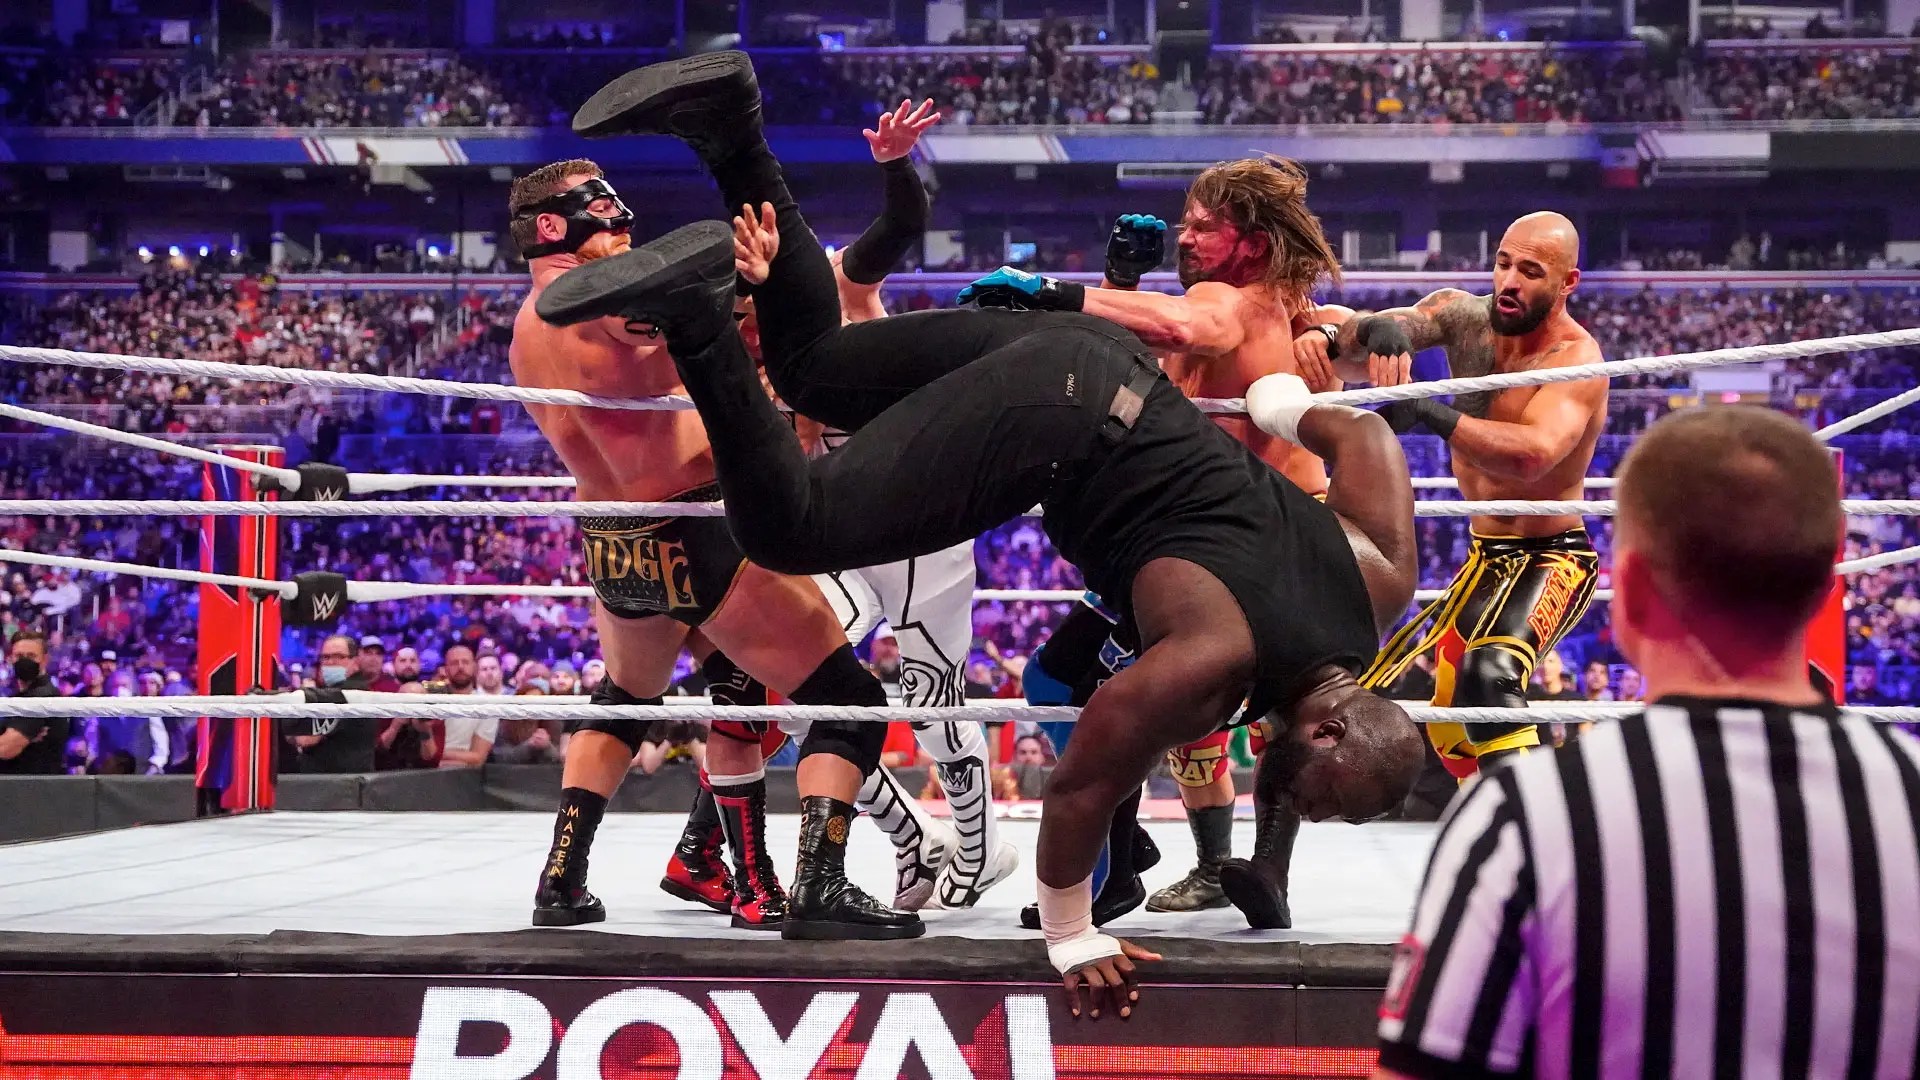 WWE Royal Rumble: Who Has the Most Elimination Record at The Royal Rumble?